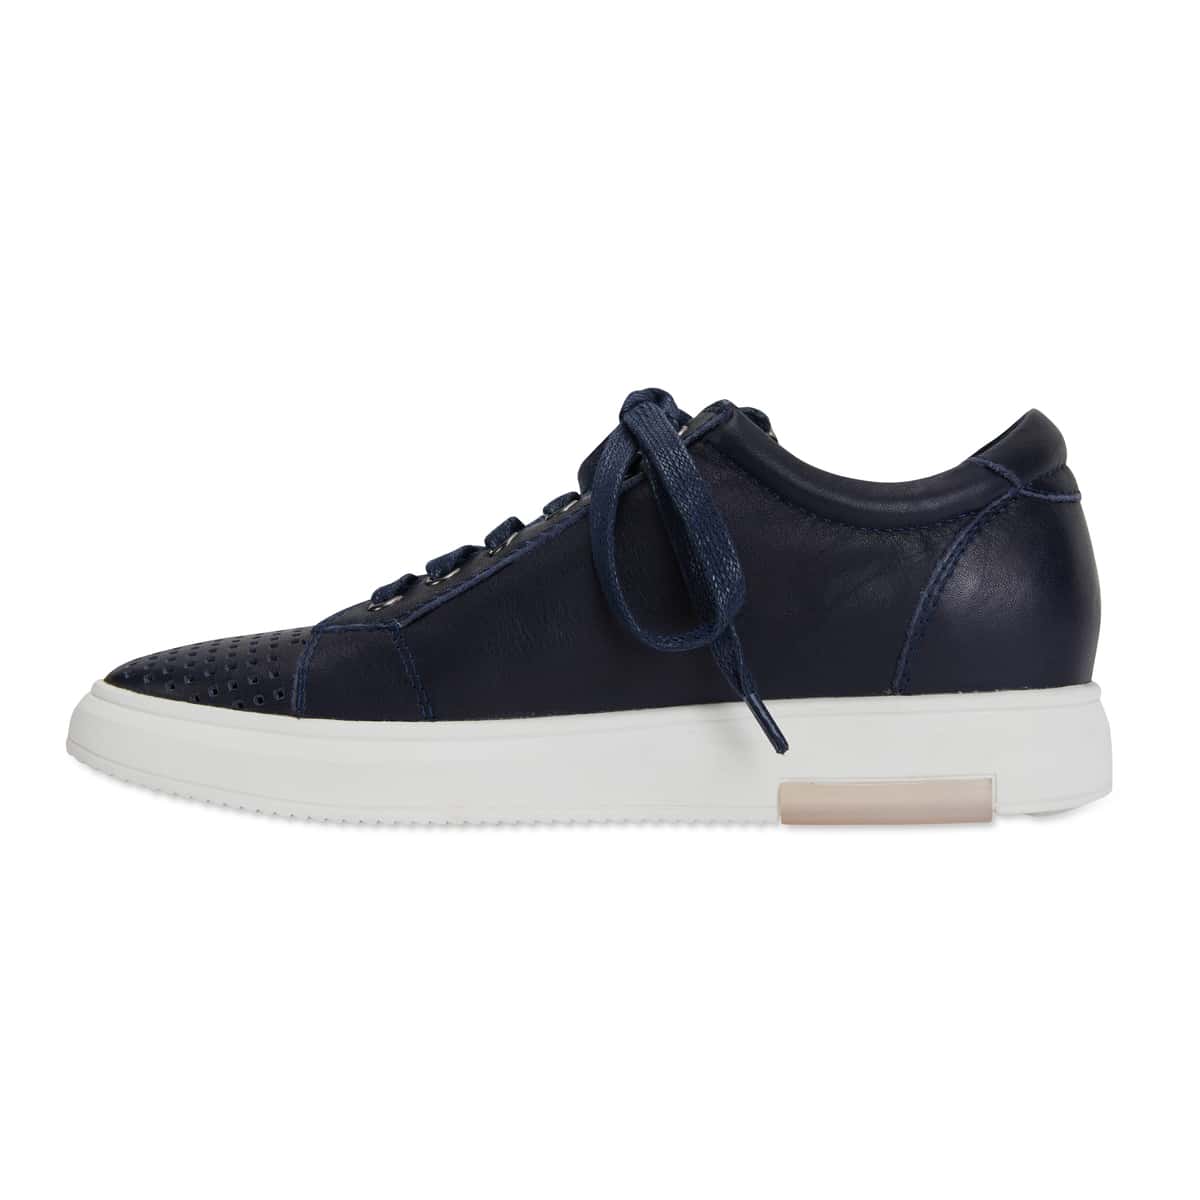 Carson Sneaker in Navy Leather